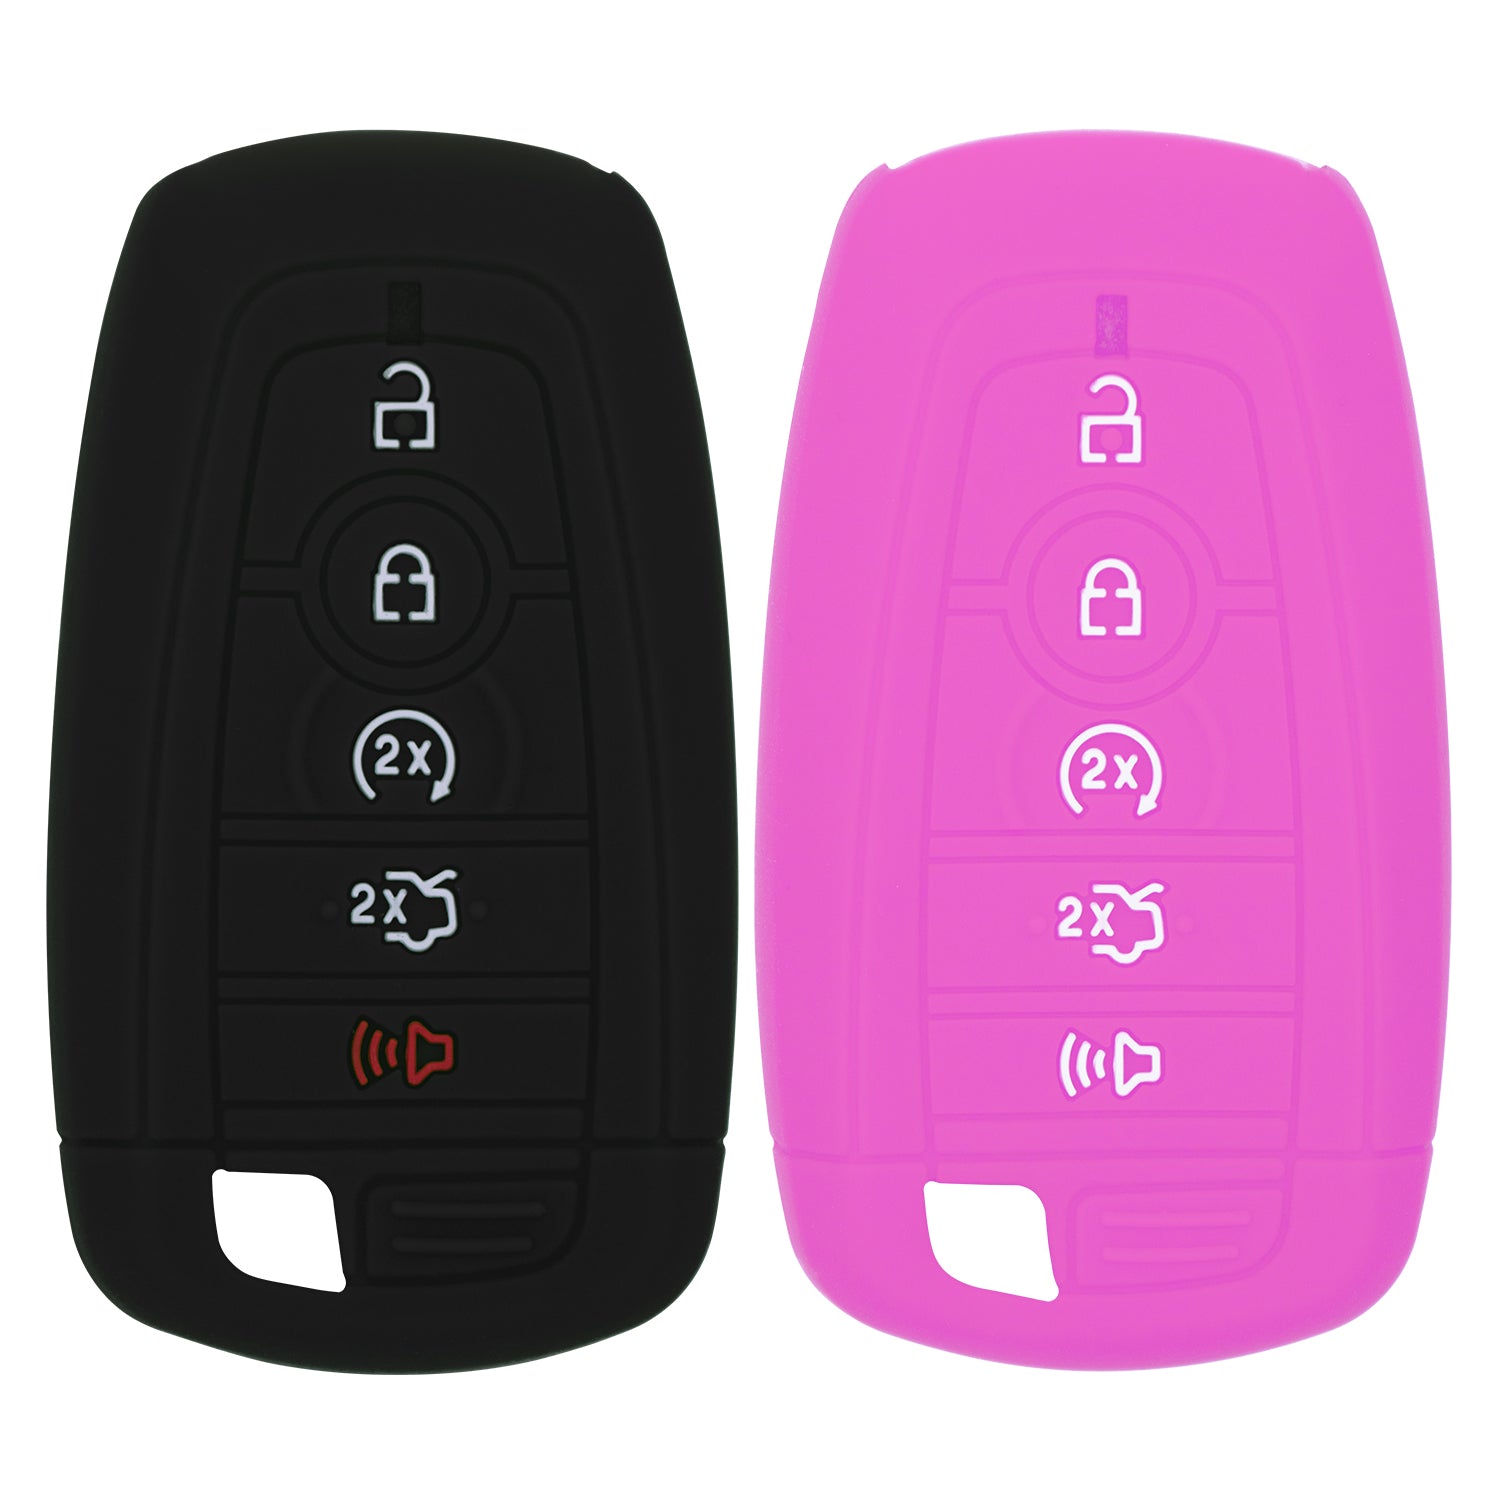 Silicone Case for Smart Key Remote Keyless Entry for Ford Fusion Explorer Edge Mustang Expedition M3N-A2C93142600 164-R8149 164R8149 R8149 (Black & Purple)